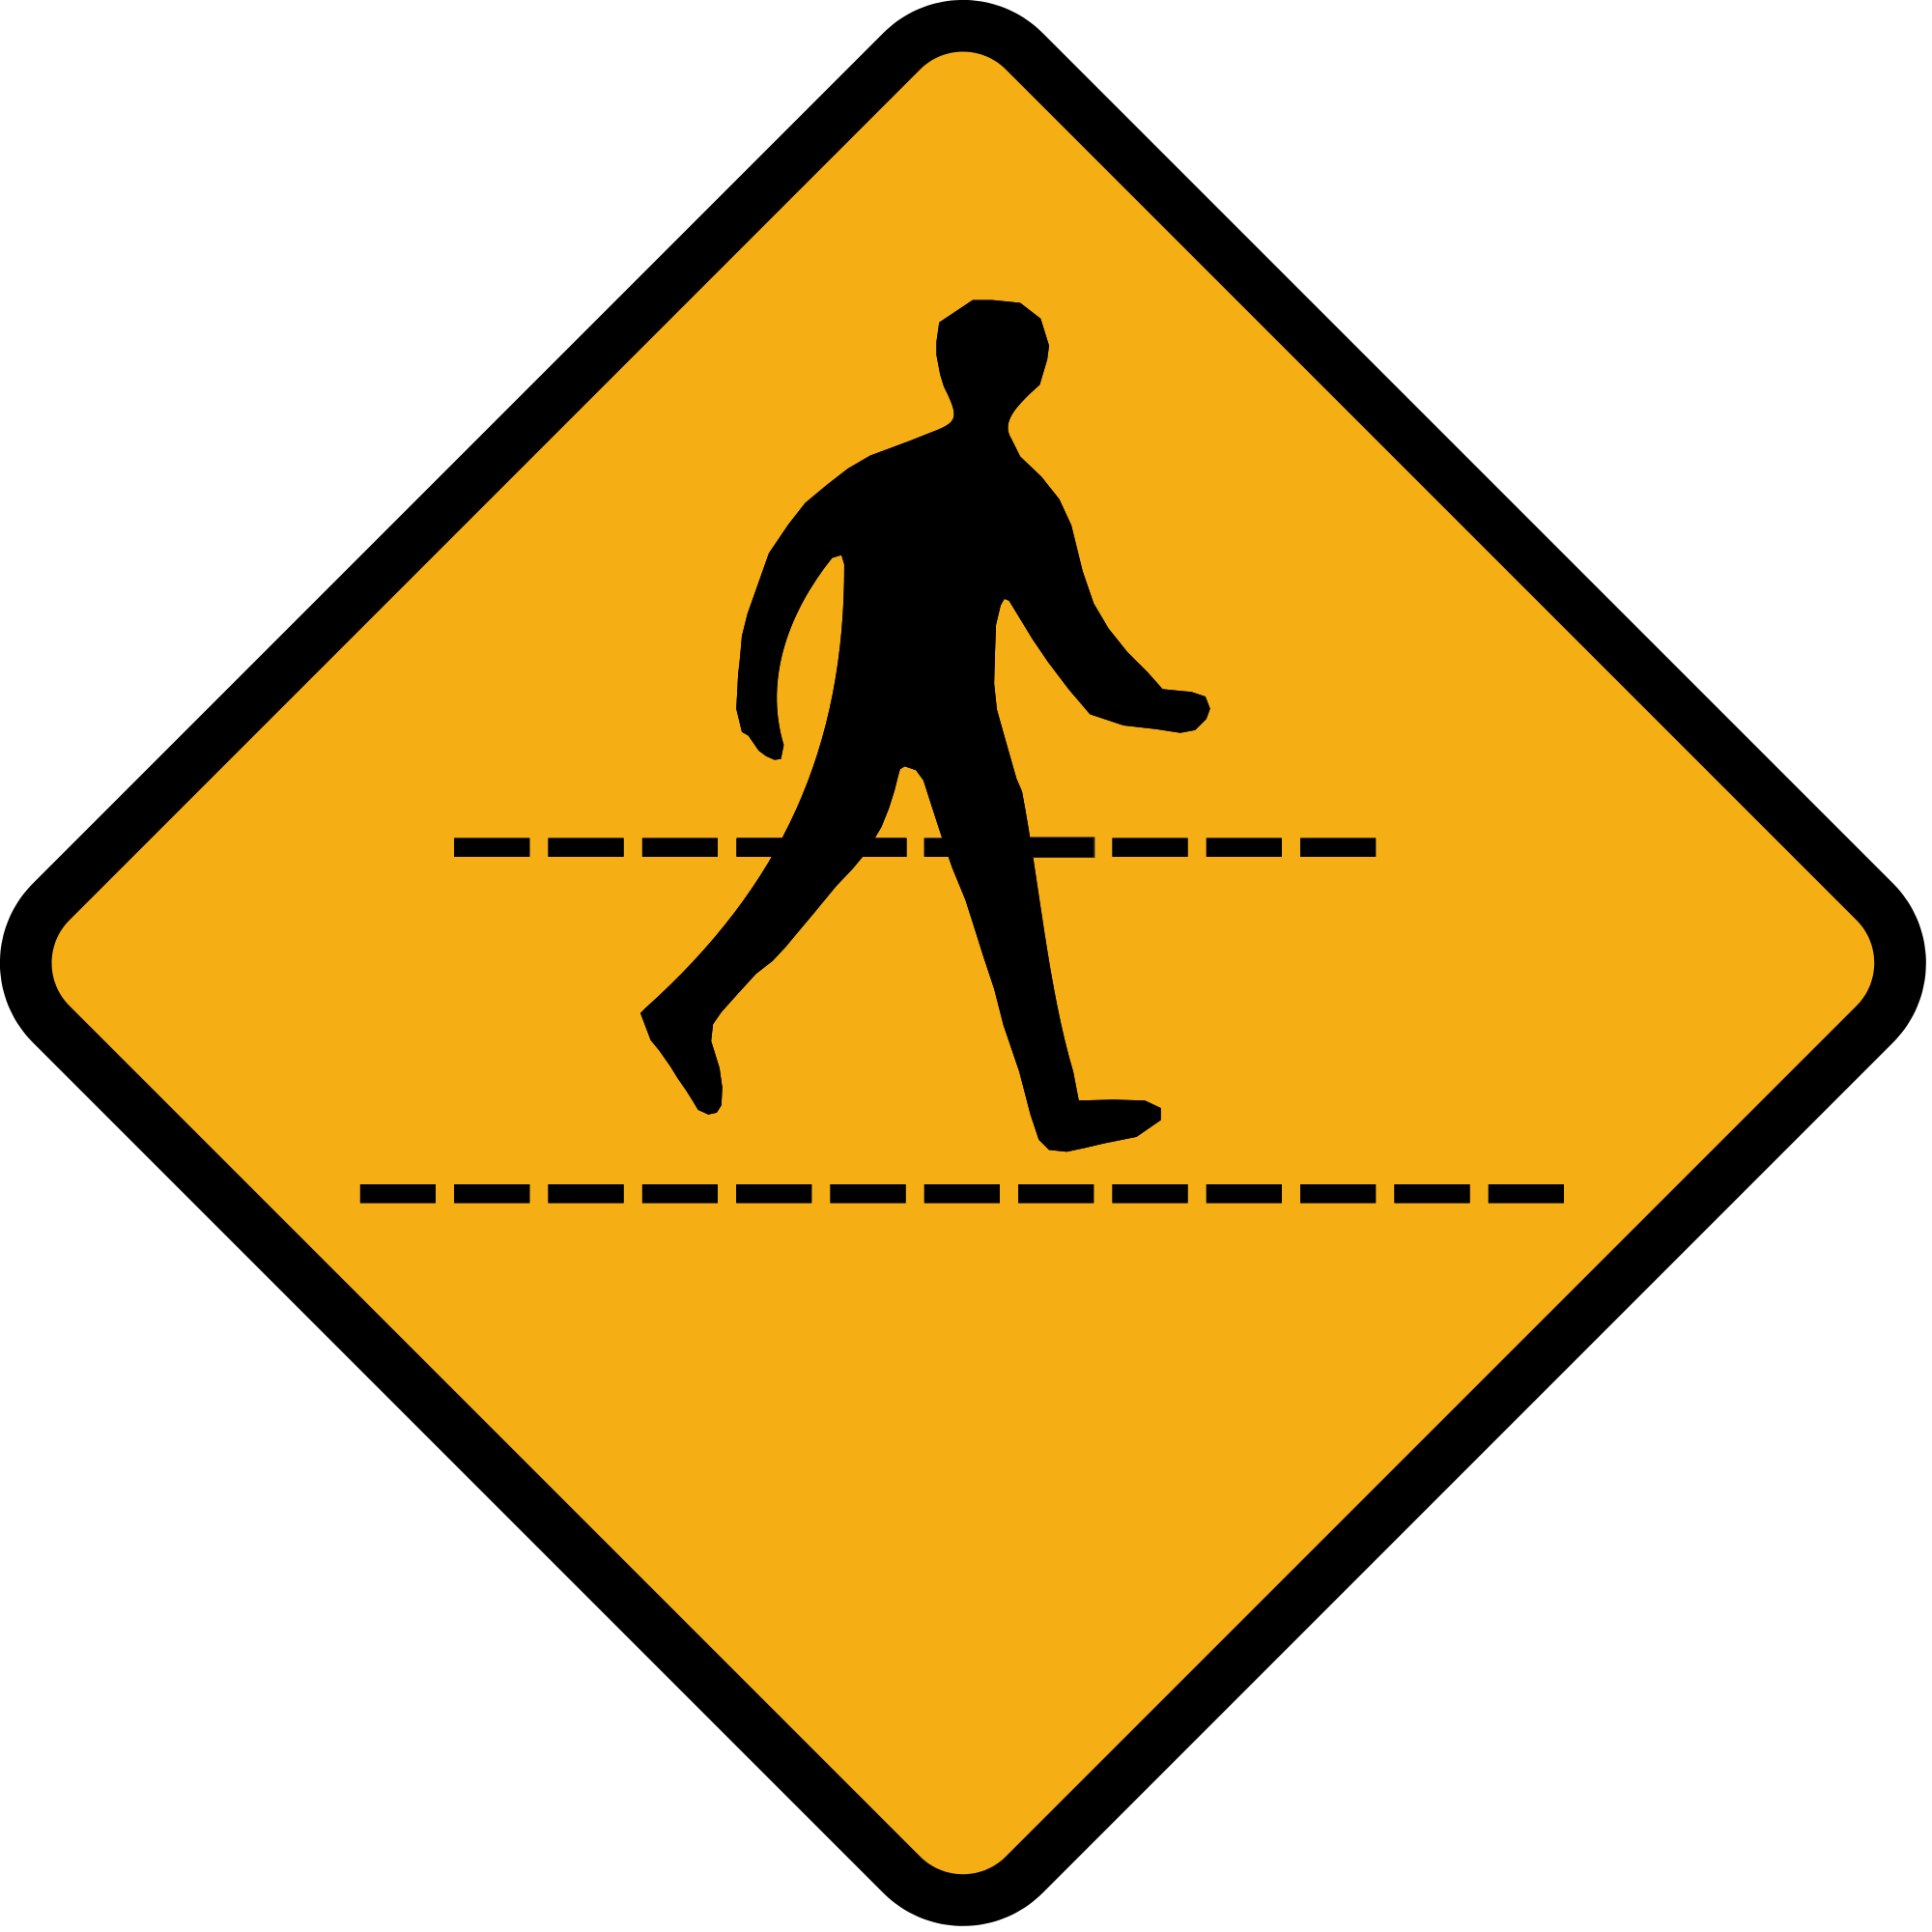 File:Diamond road sign pedestrian crossing ahead.svg - Wikimedia Commons